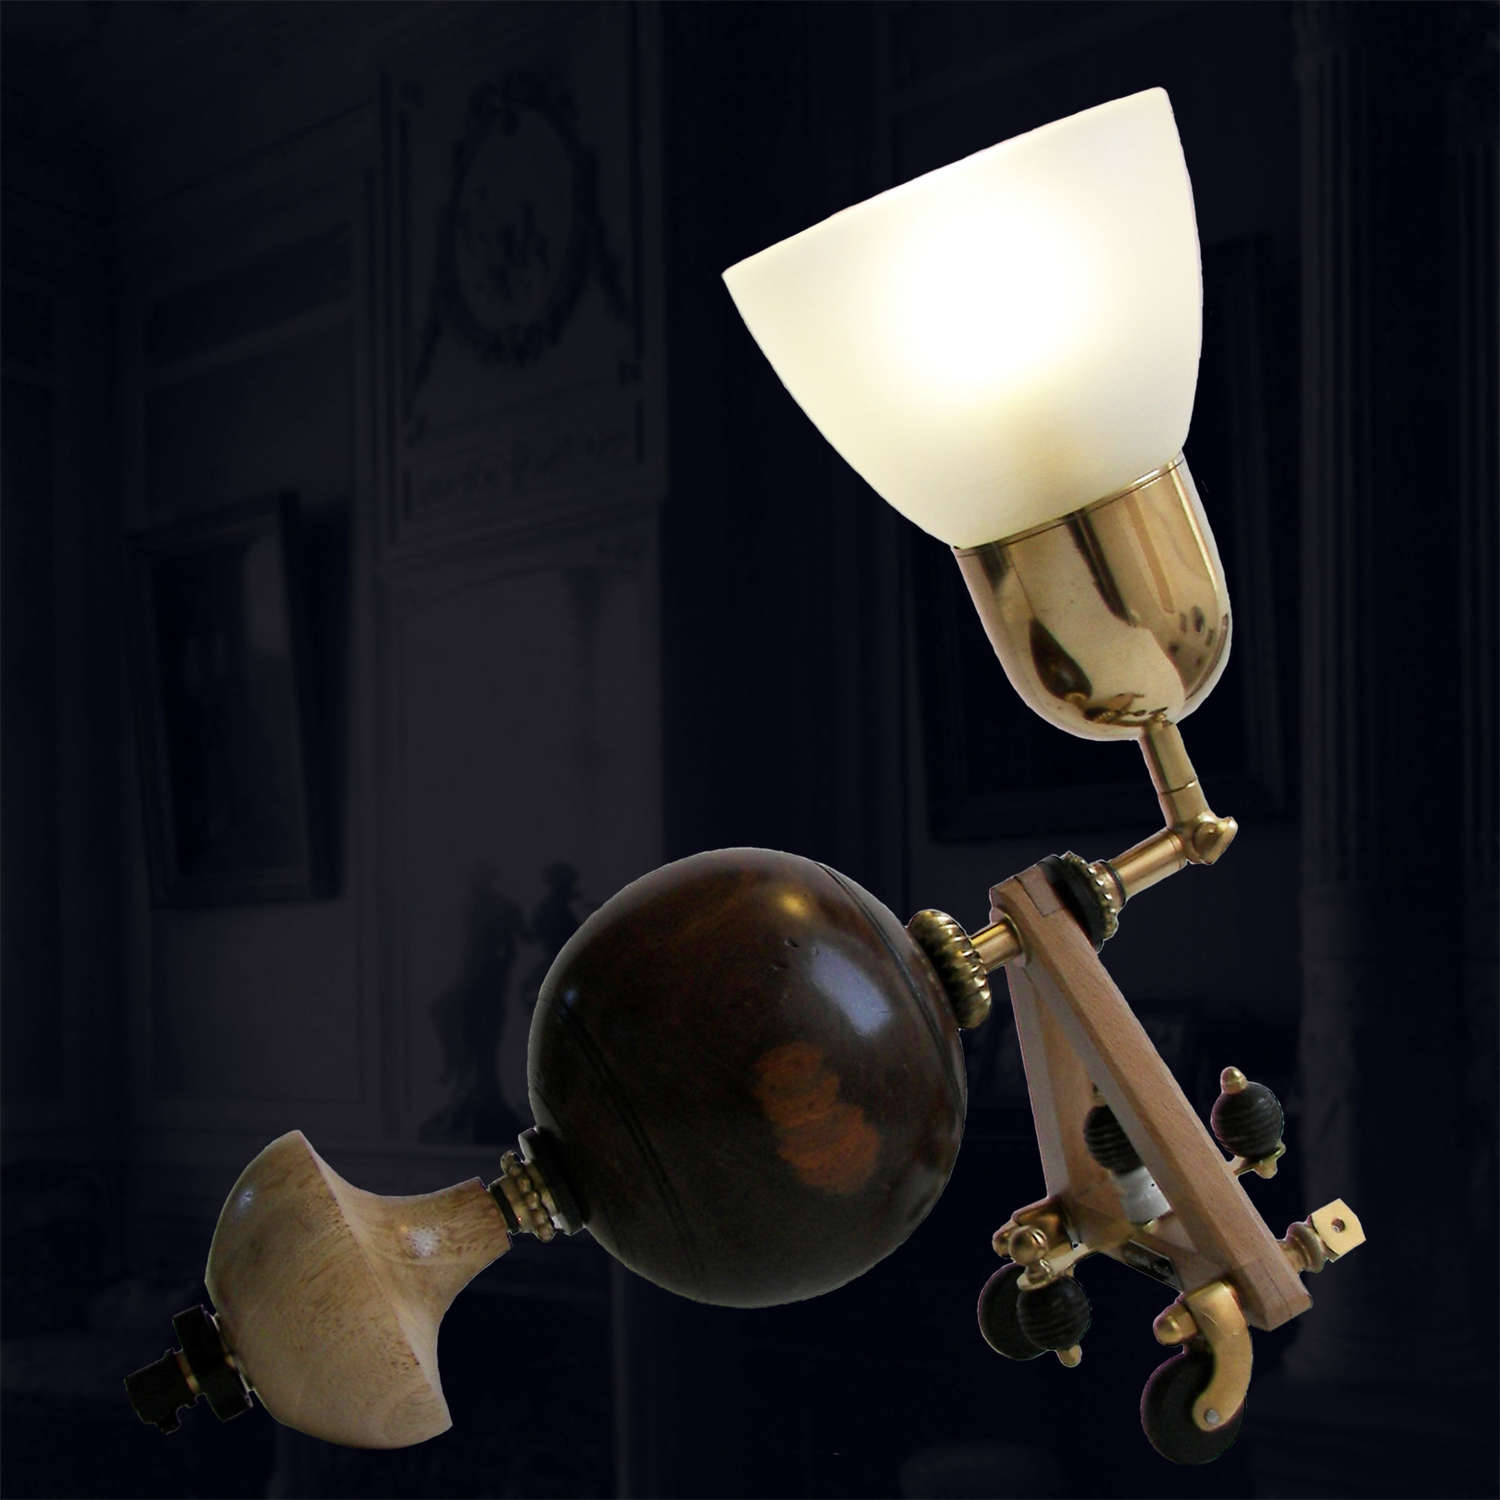 Bespoke unique lamp - Apparition - by Gilles Bourlet Dartmouth